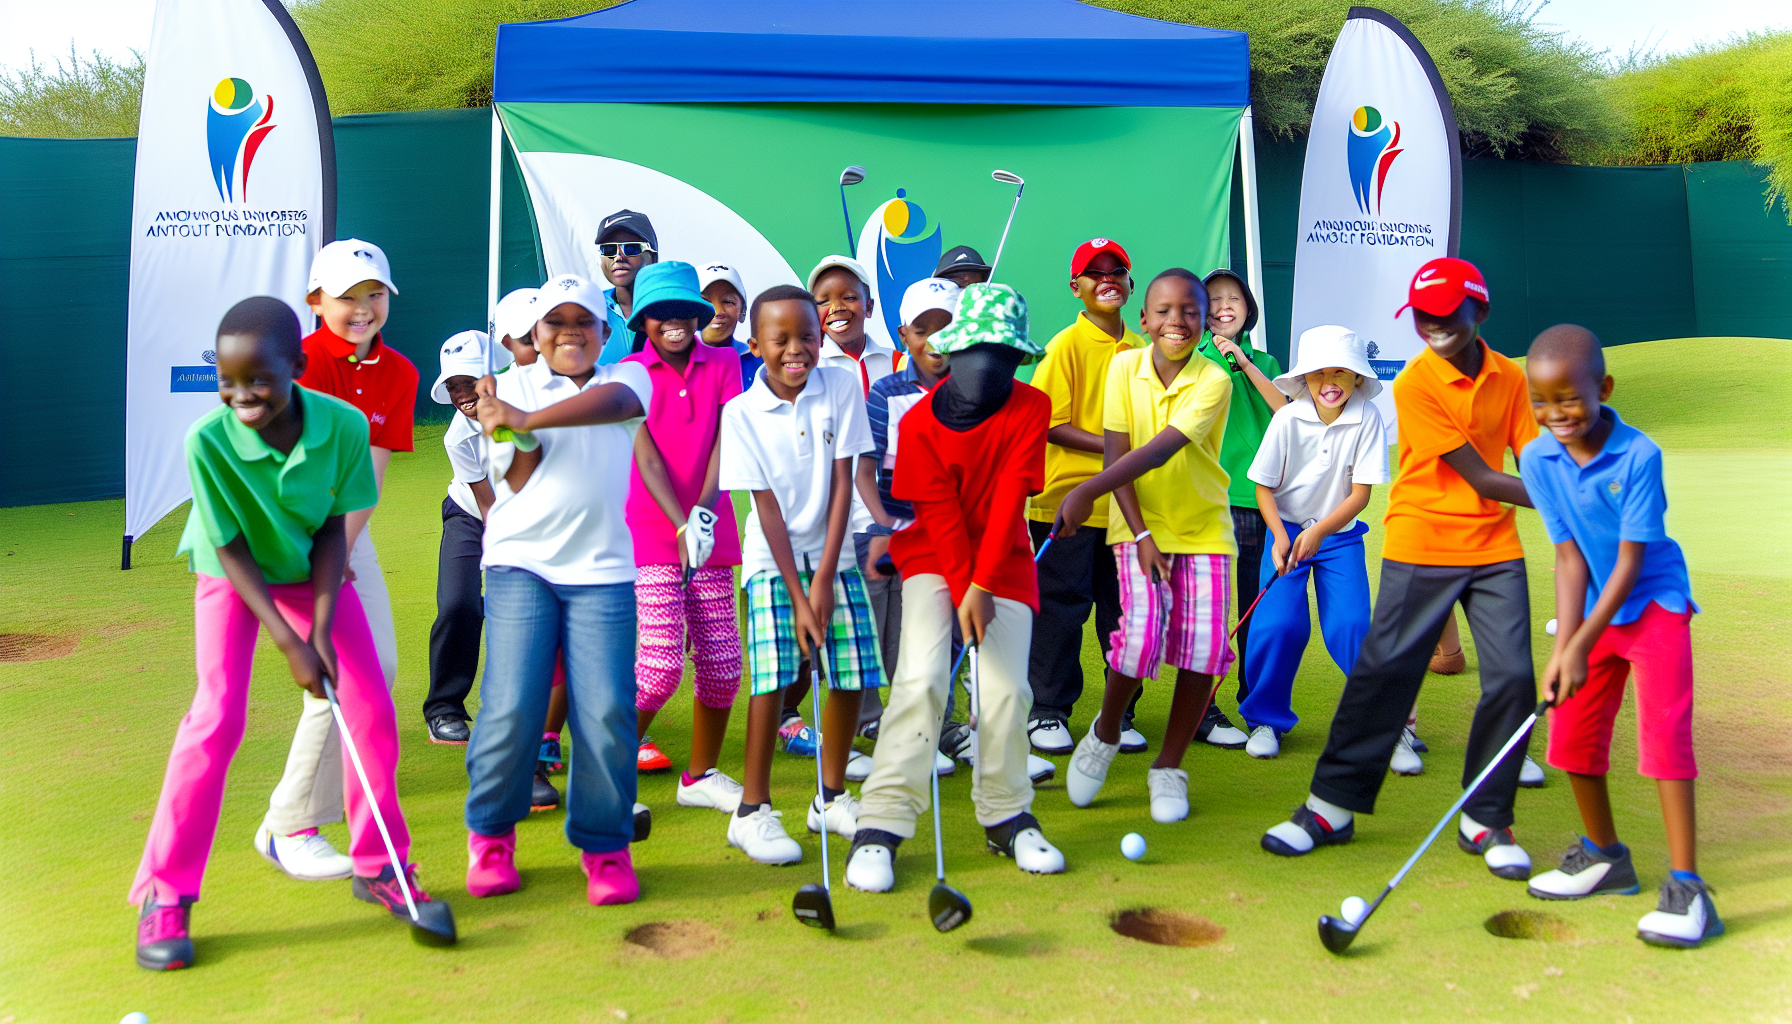 Children playing golf at a charity event supported by the Jordan Spieth Family Foundation